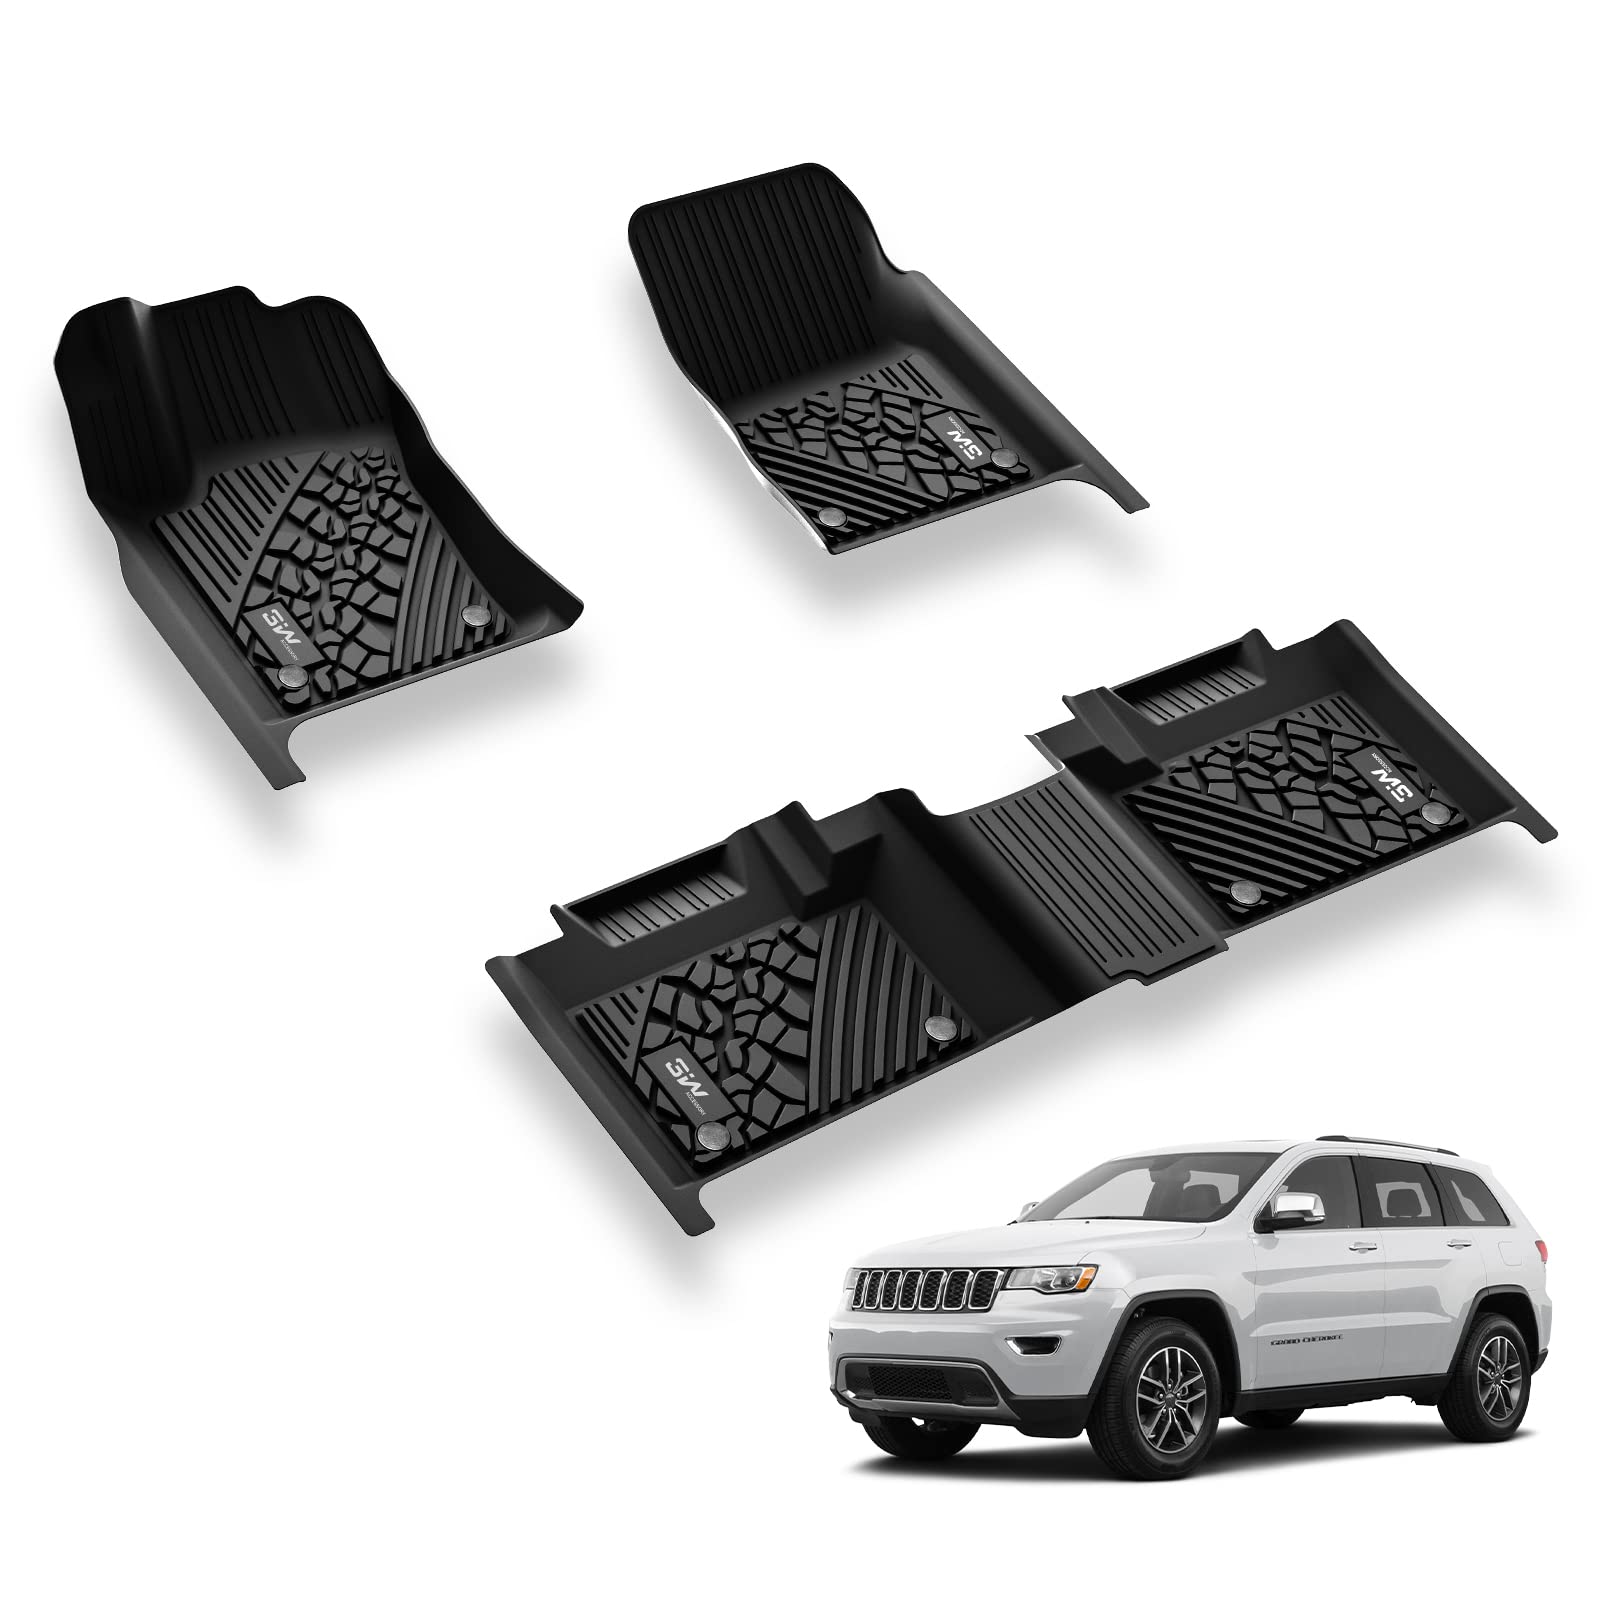 3W Jeep Grand Cherokee 2013-2015 (Non L or WK) Custom Floor Mat Trunk Mat TPE Material & All-Weather Protection, 2013-2015 / Grand Cherokee 2013-2015